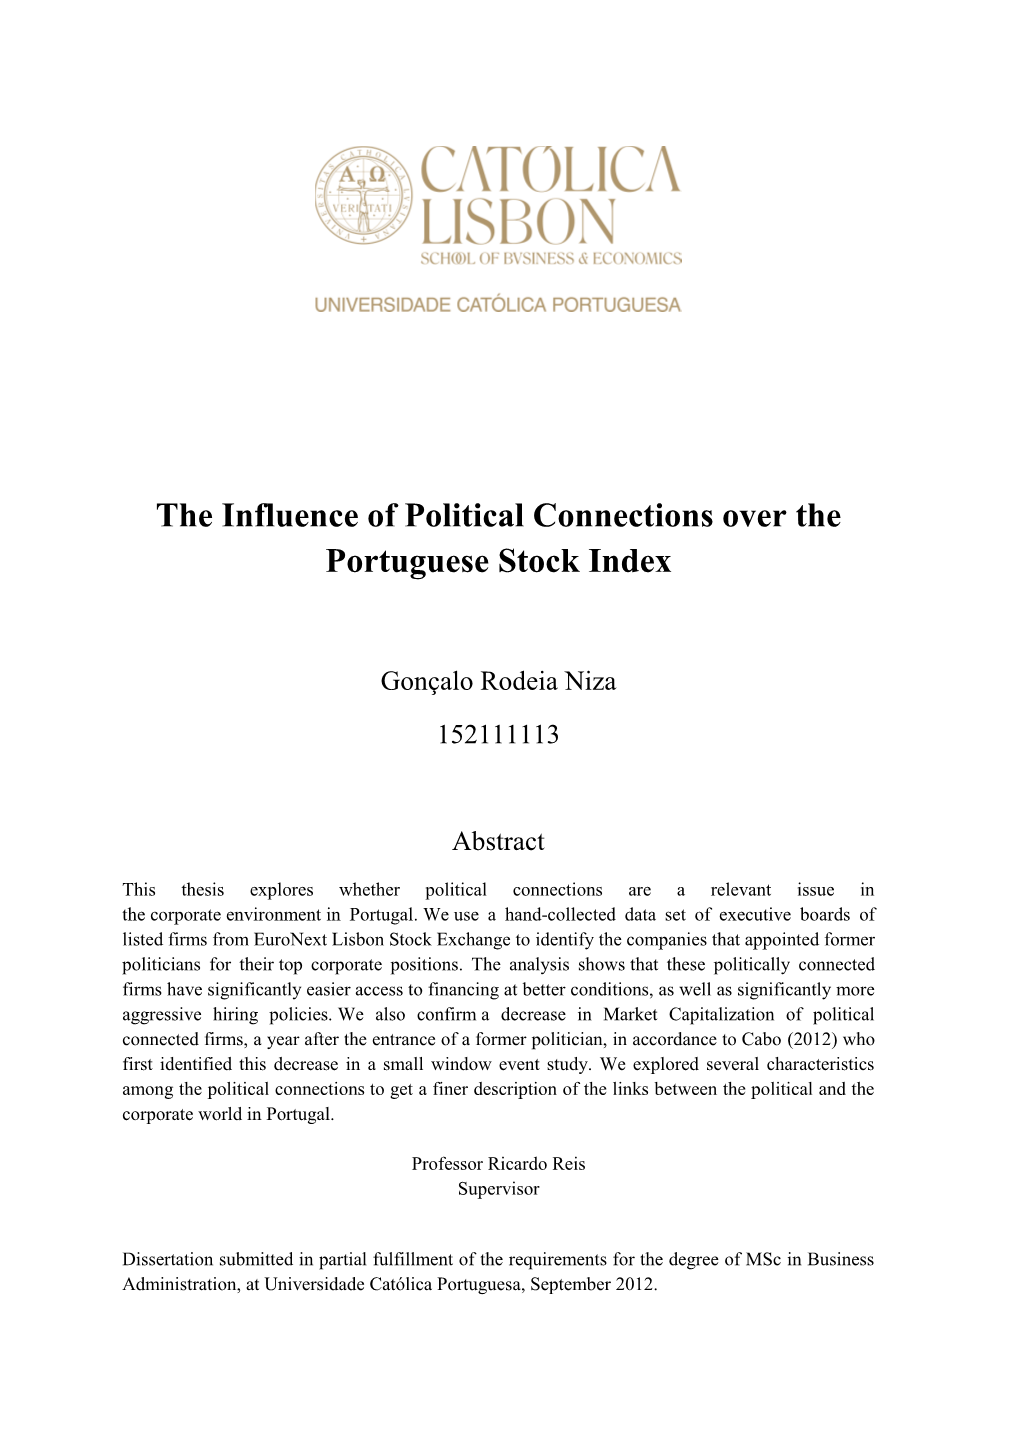 The Influence of Political Connections Over the Portuguese Stock Index